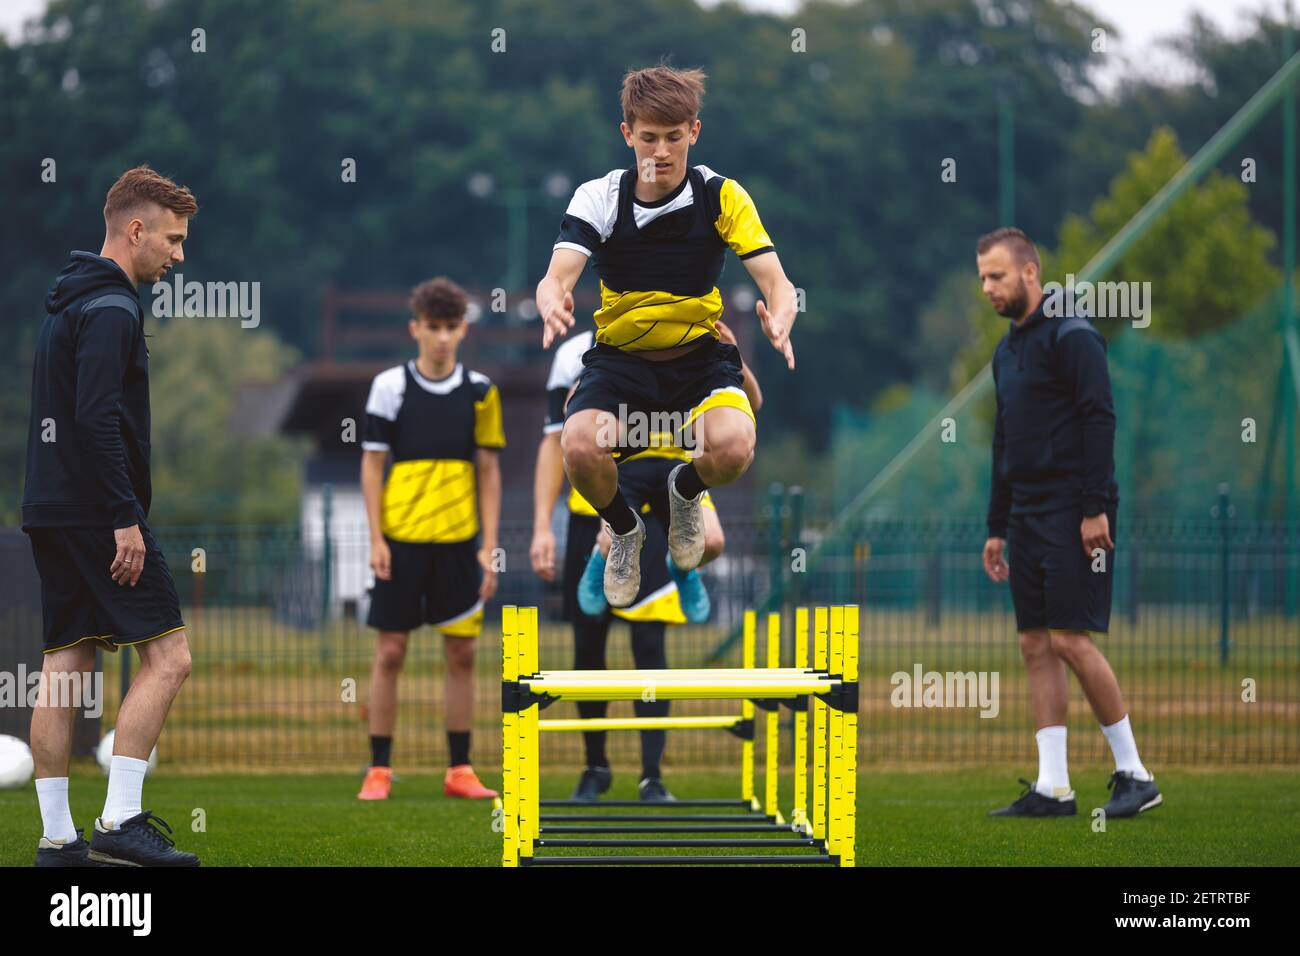 Youth Soccer Team on Training. Young Boys in Football Club Practicing Durability. Teenage Boy Jumping High Over Hurdle Obstacles. Young Men Coaching S Stock Photo